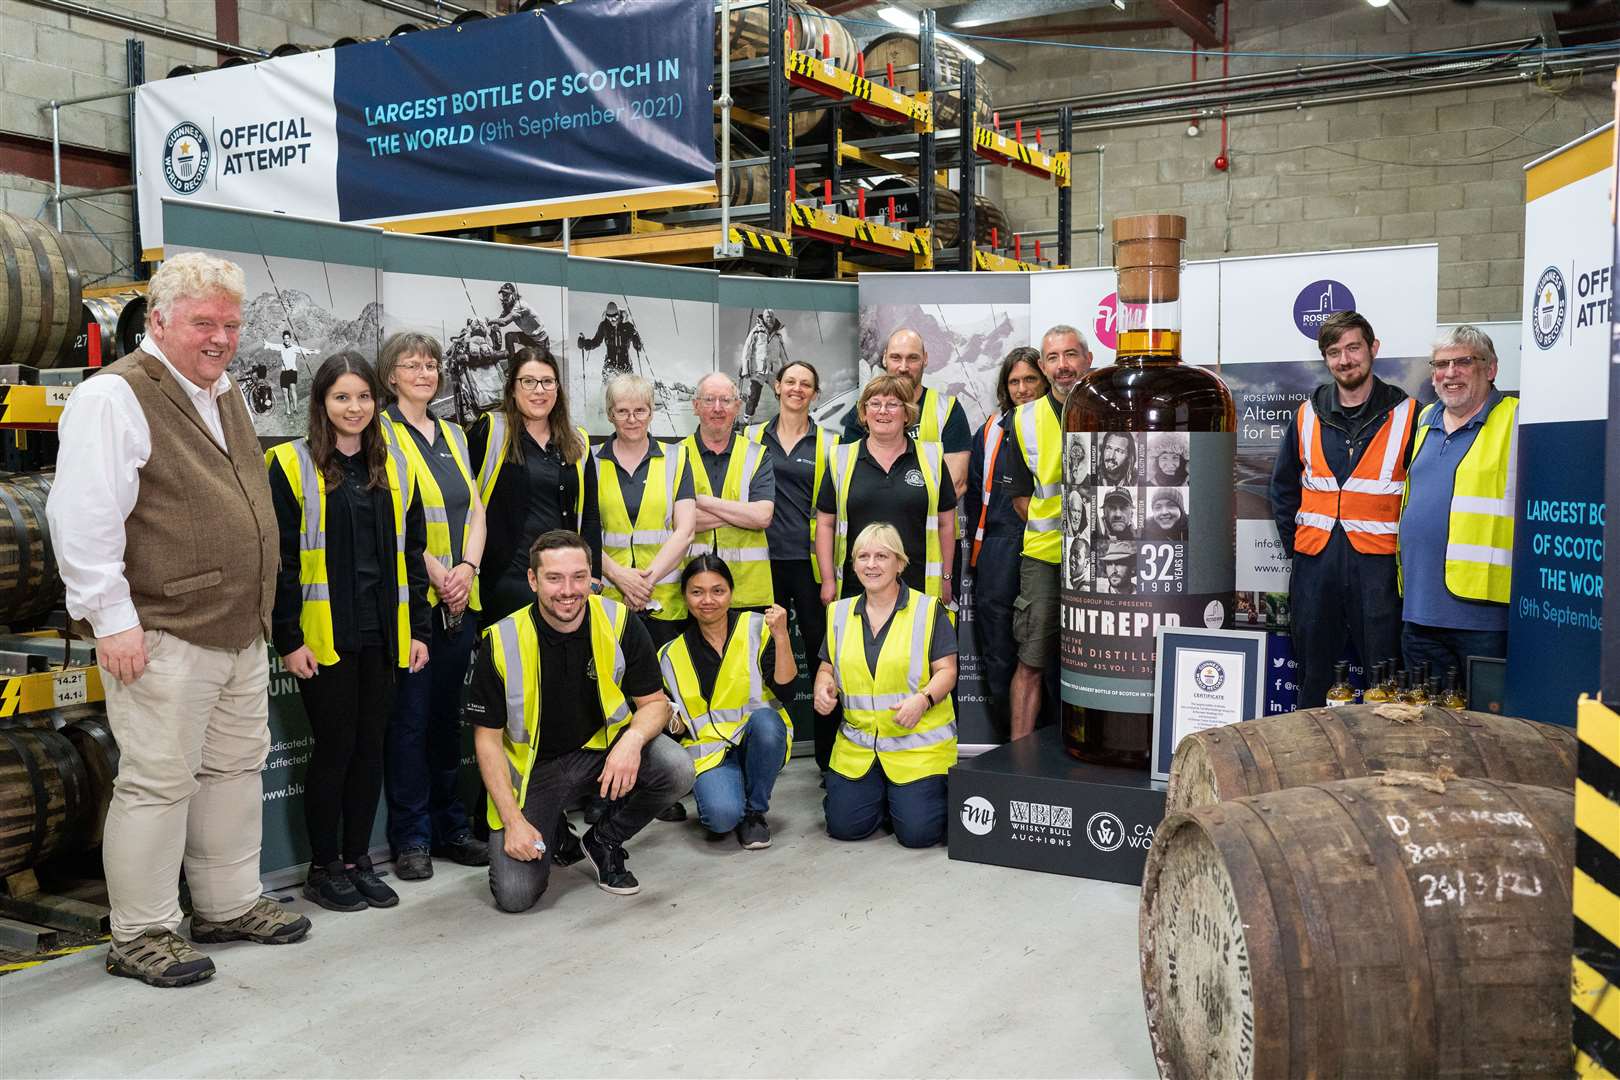 The Duncan Taylor team with the record breaking bottle of whisky.